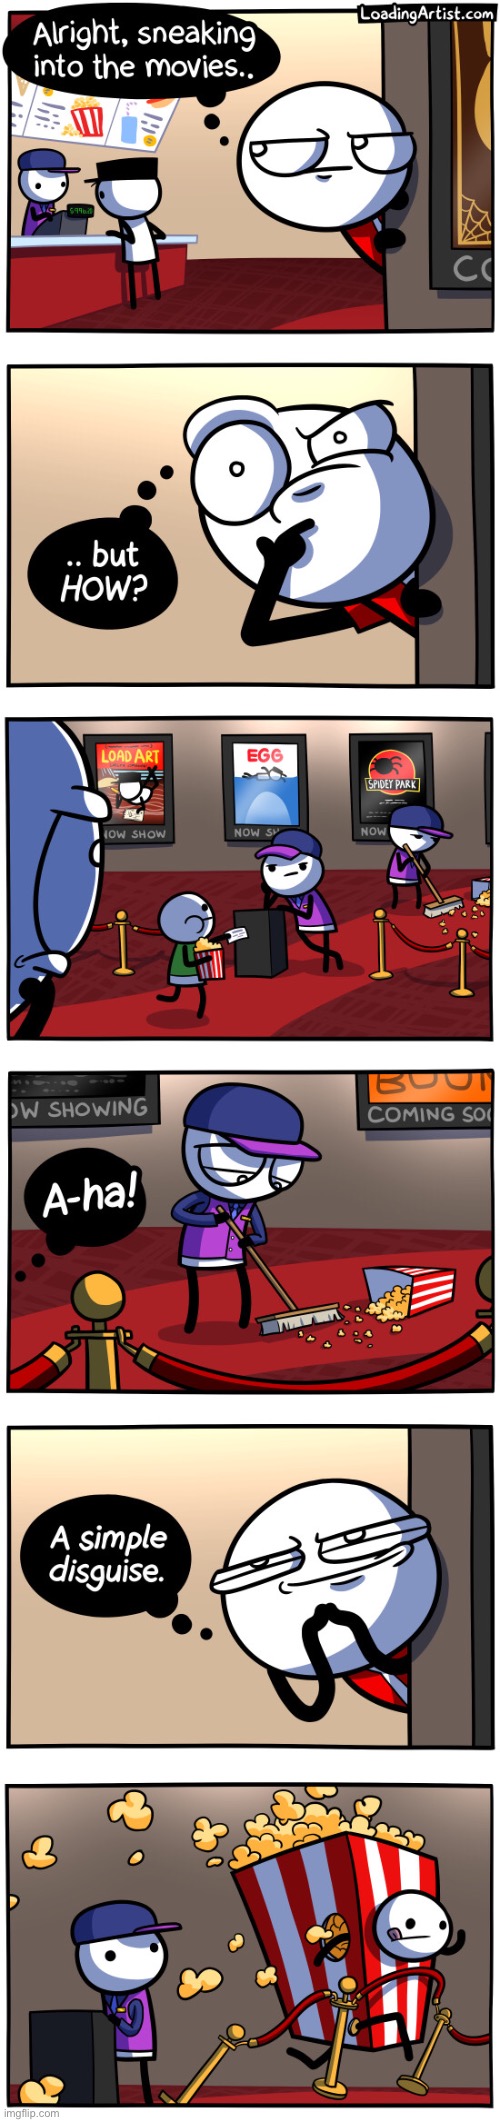 The popcorn always makes it in.... | image tagged in memes,funny,comics,loading artist,popcorn,movies | made w/ Imgflip meme maker